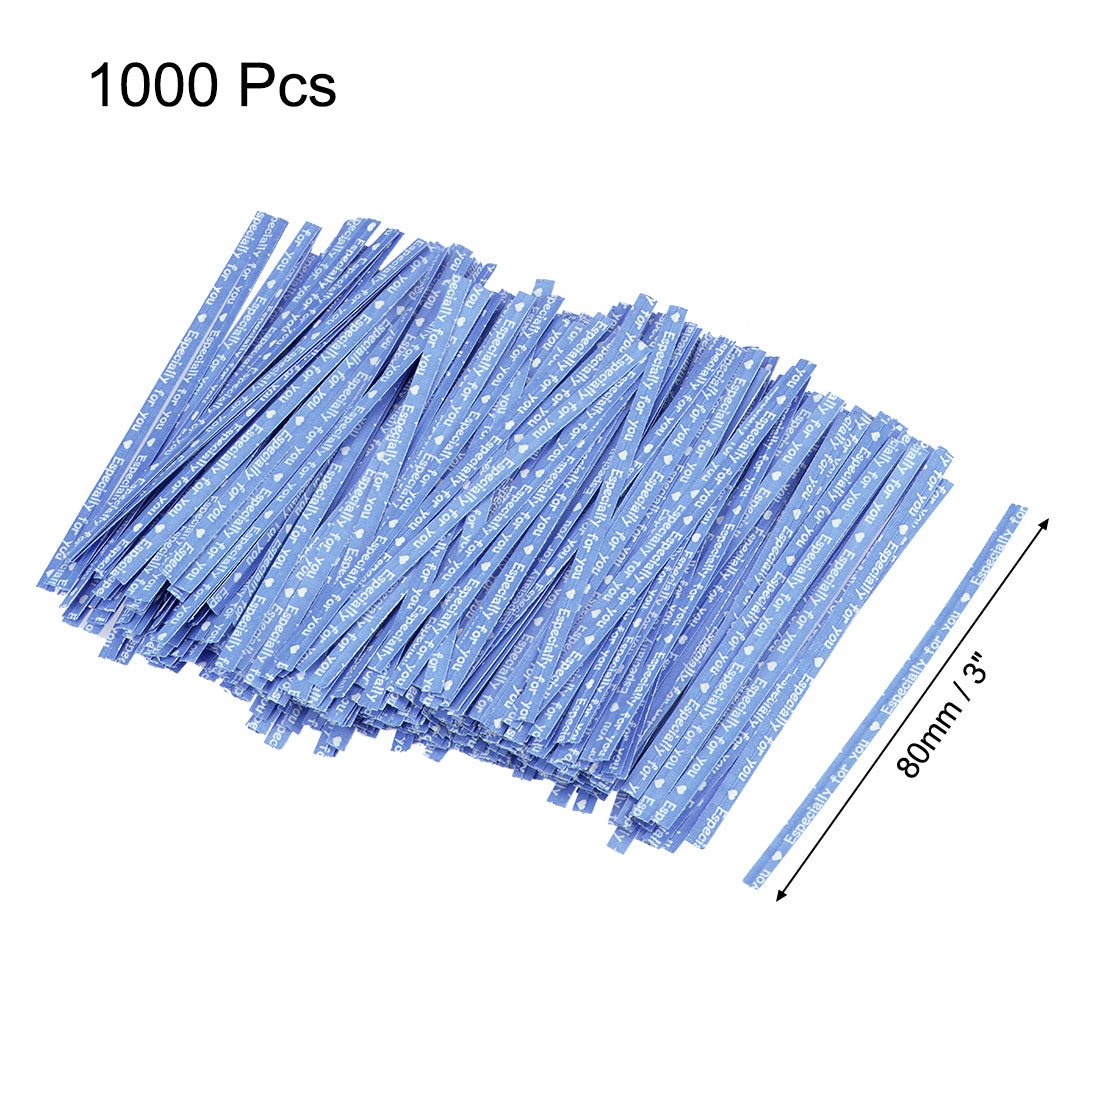 uxcell Uxcell Long Strong Twist Ties 3.15 Inch Quality  Closure for Tying Gift Bags Art Craft Ties Manage Cords Bule 1000pcs